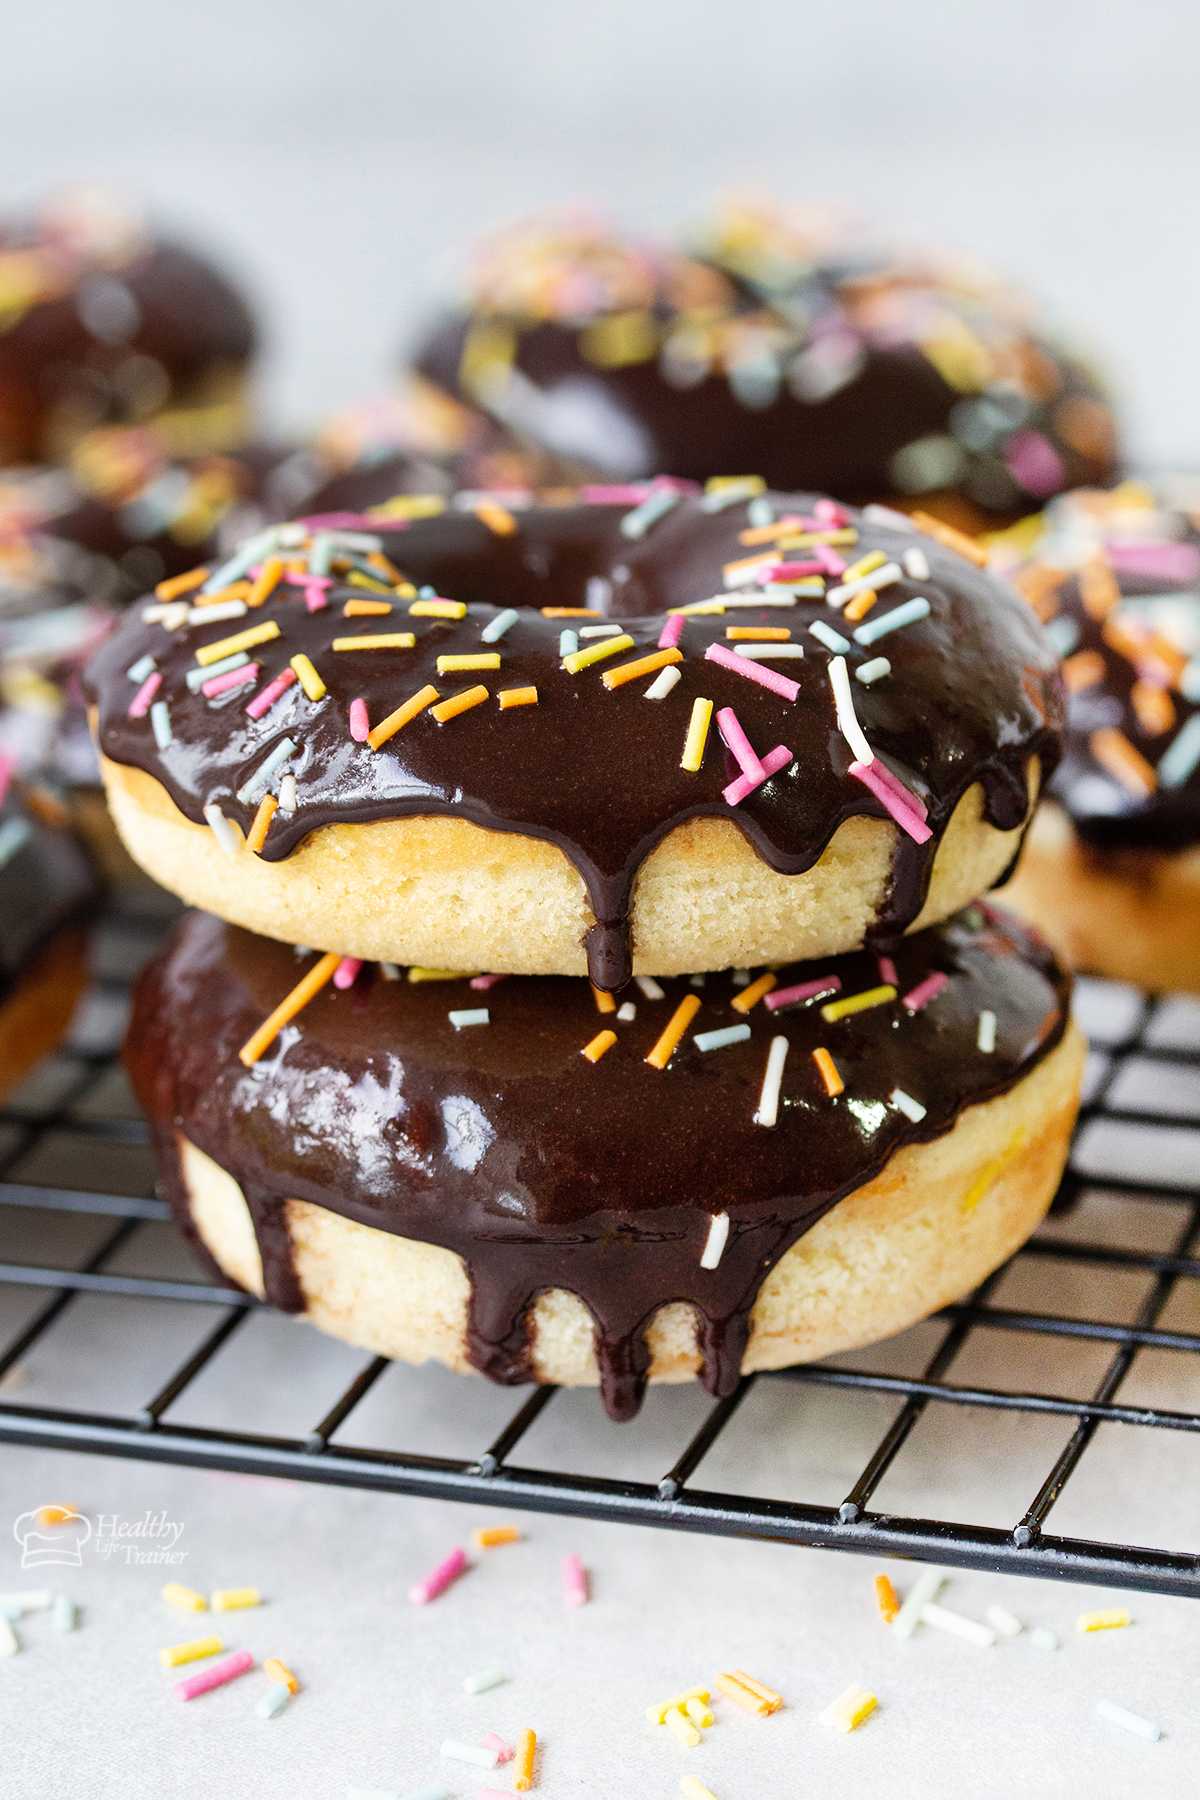 Chocolate Frosted Homemade Oven Baked Donuts 